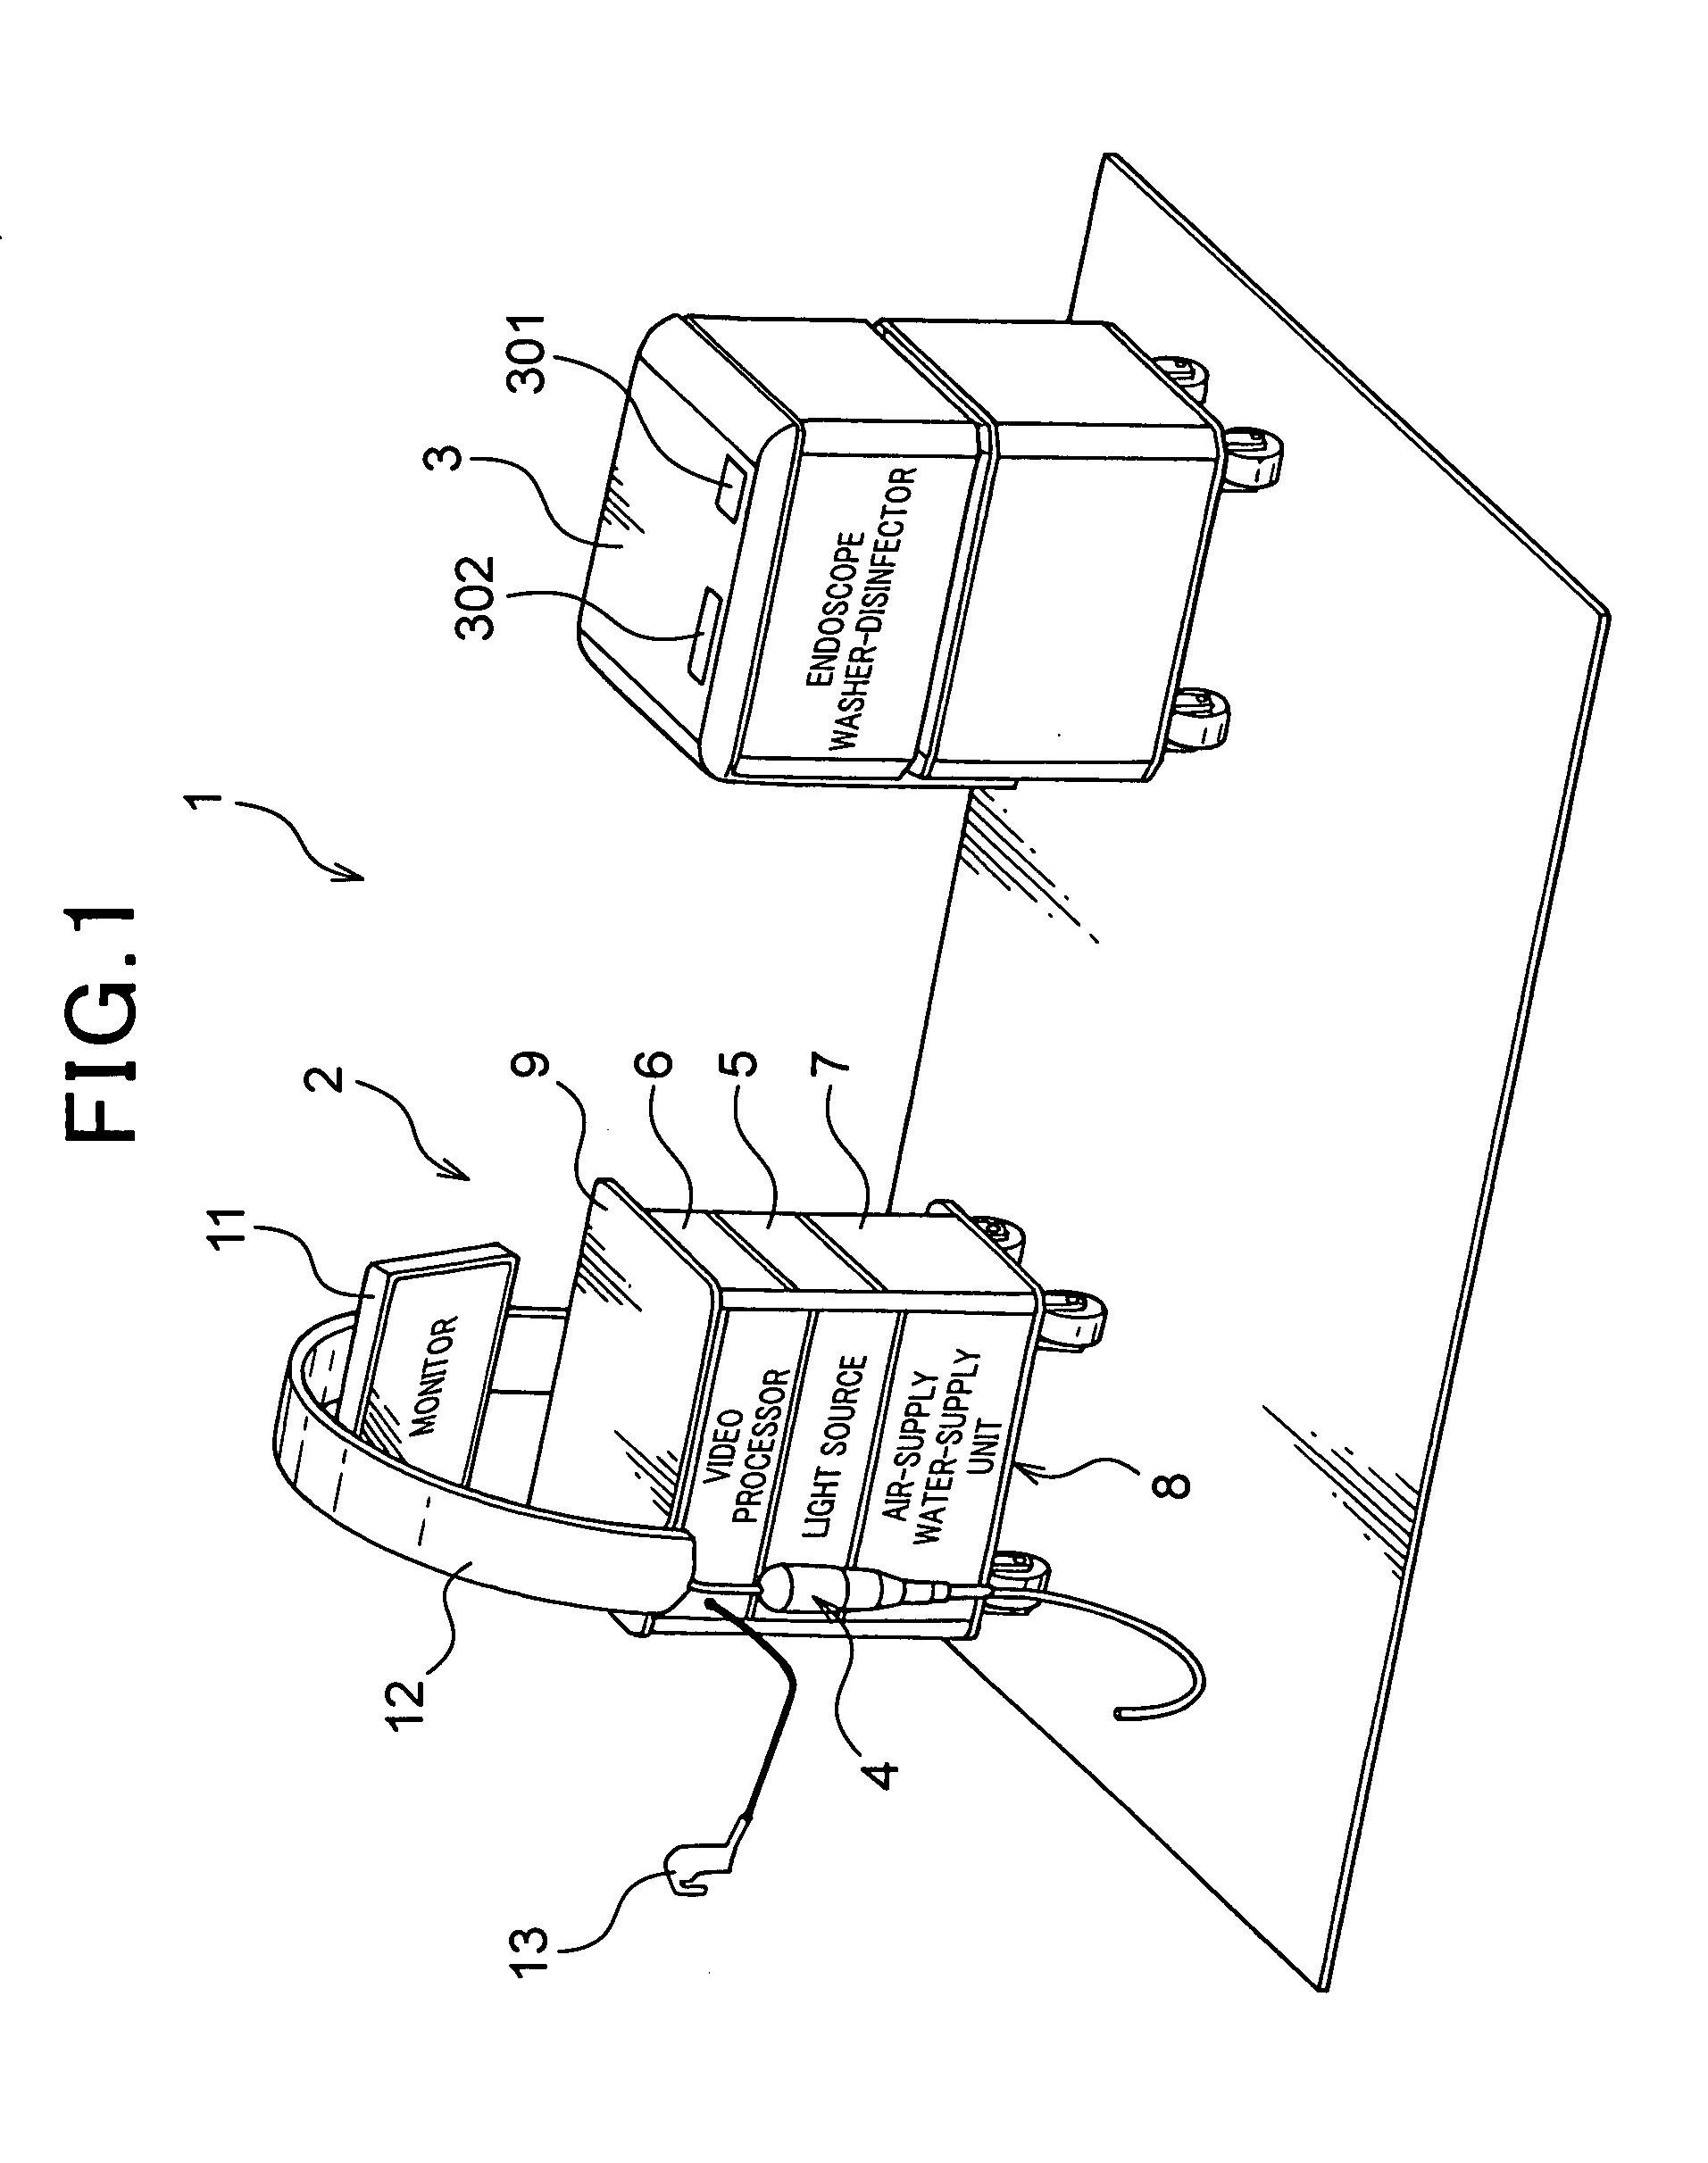 System and method for managing cleaning and disinfecting steps for endoscope